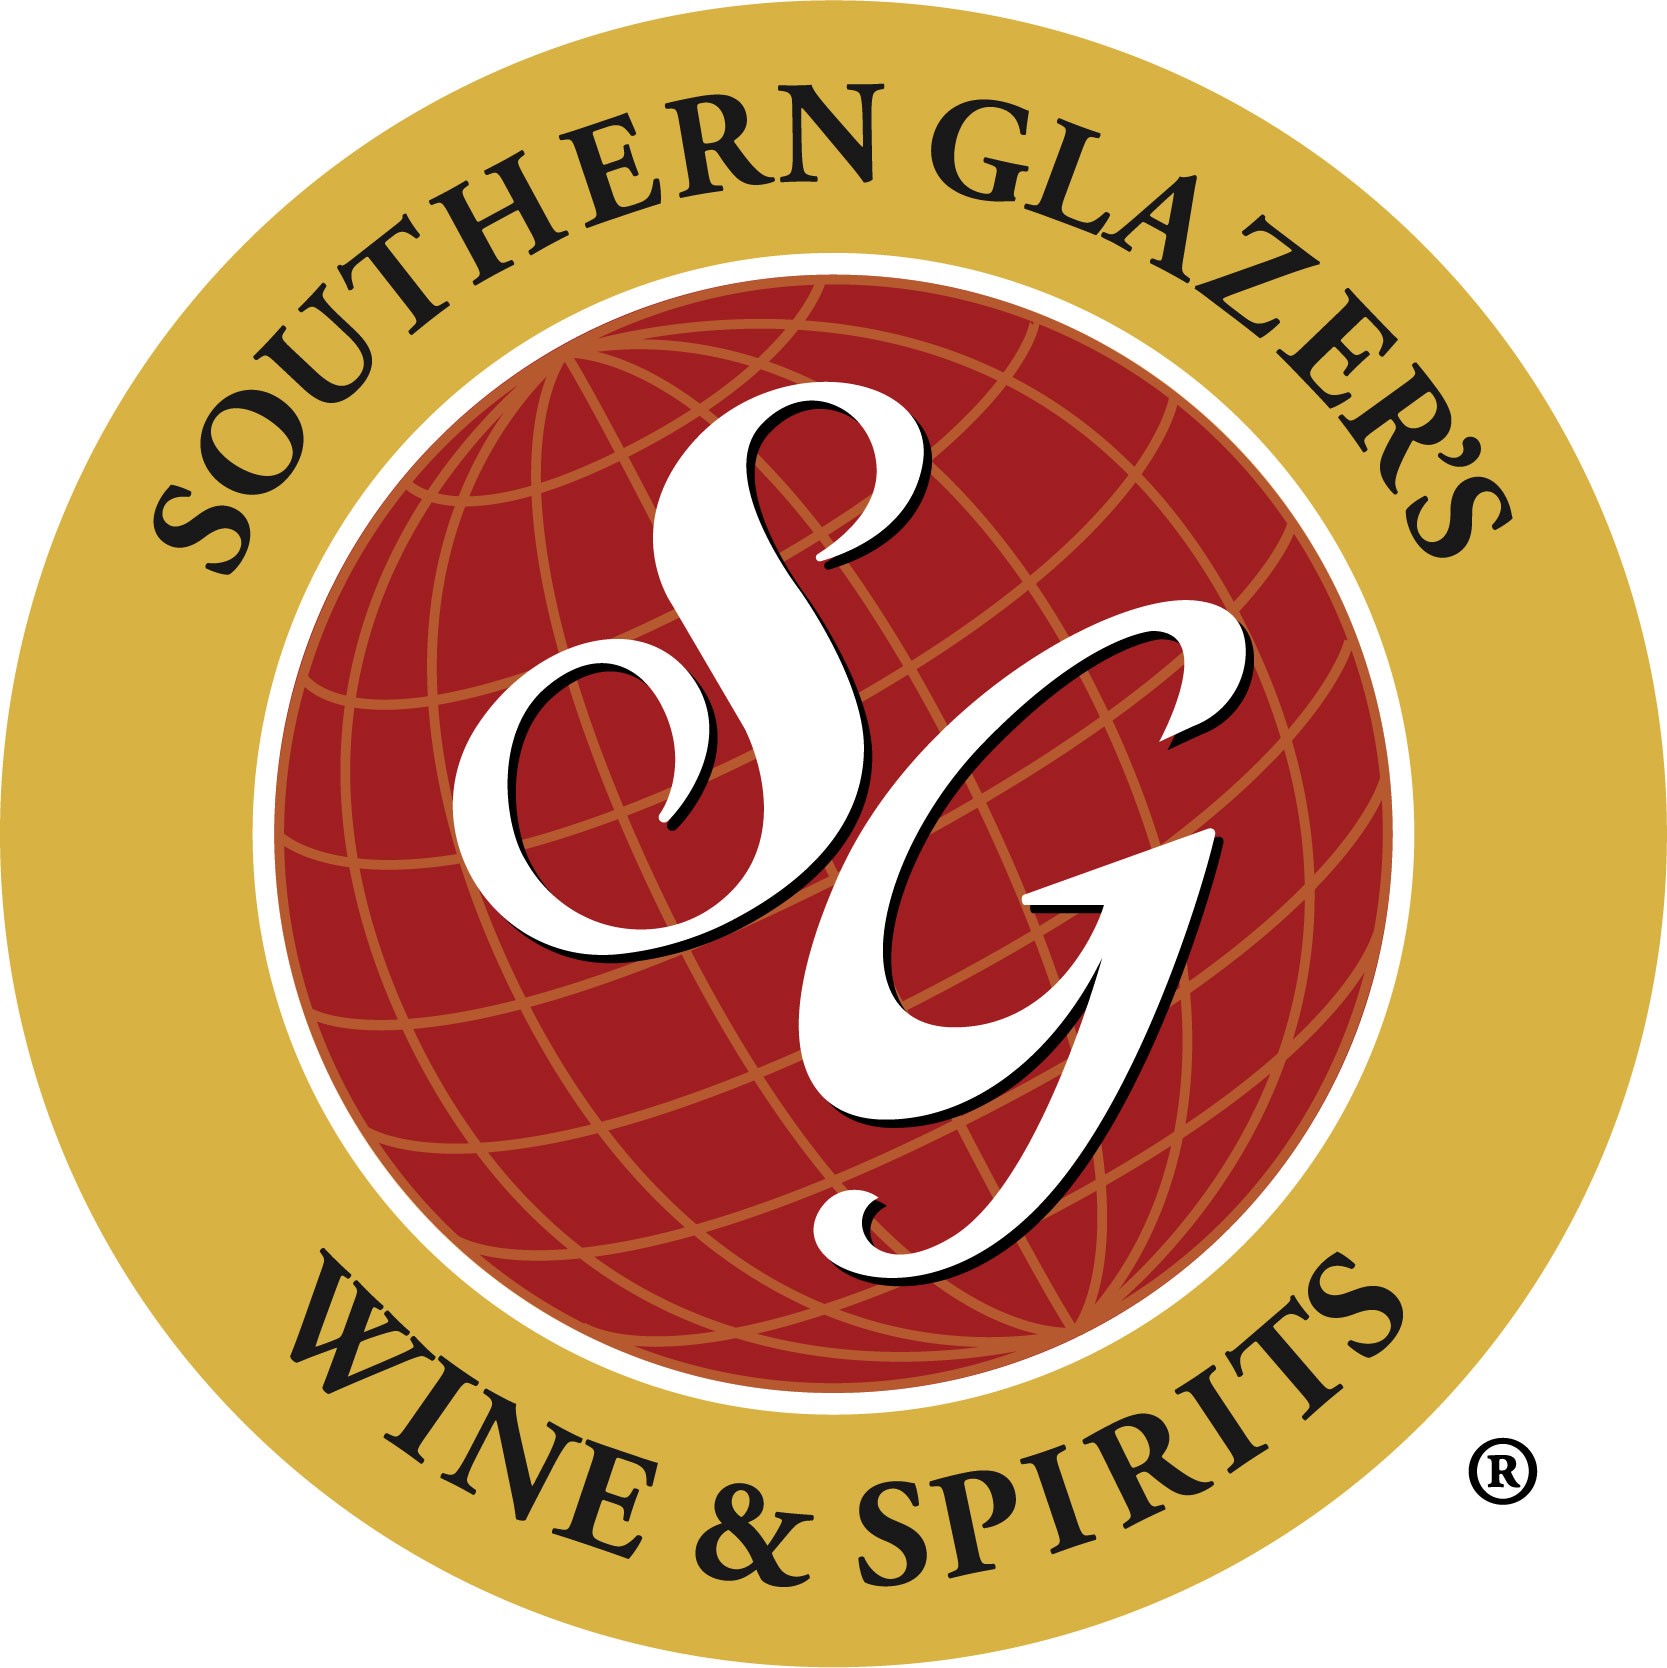 Southern Glazes Wine and Spirits logo with hyperlink.